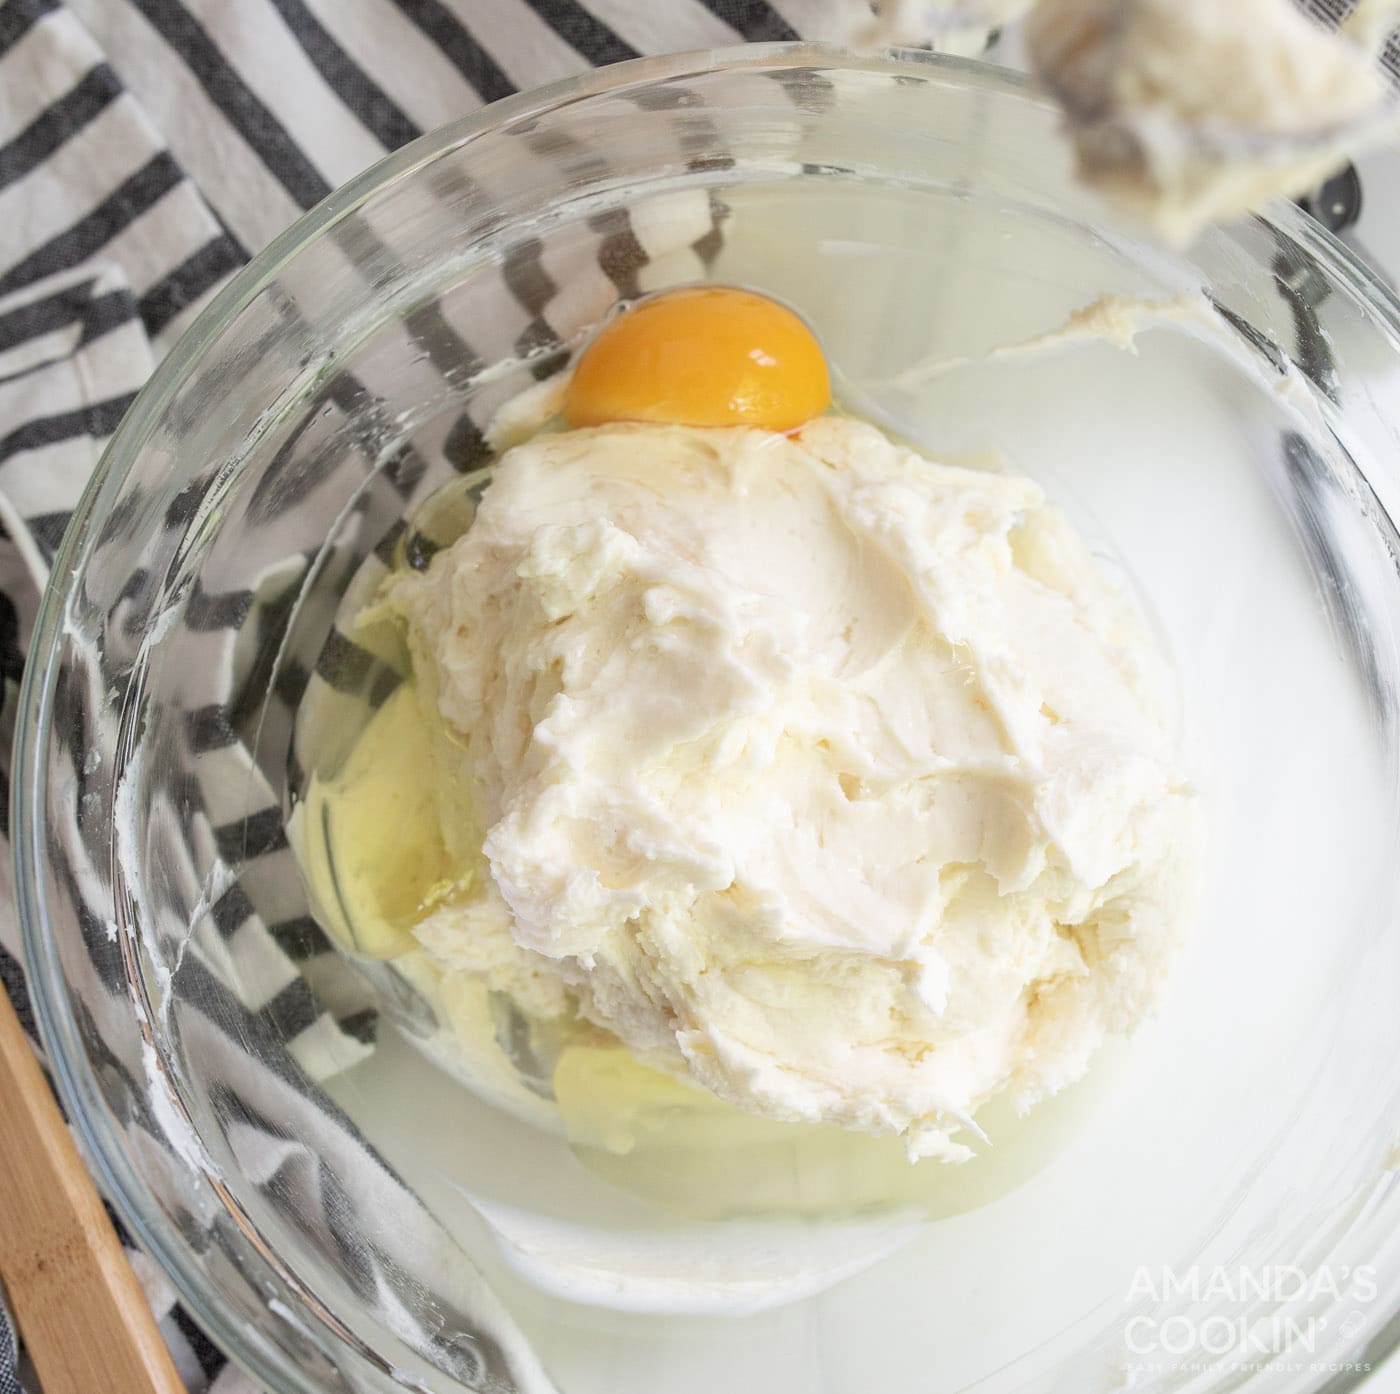 lemon juice, vanilla extract, and an egg in bowl with cream cheese mixture